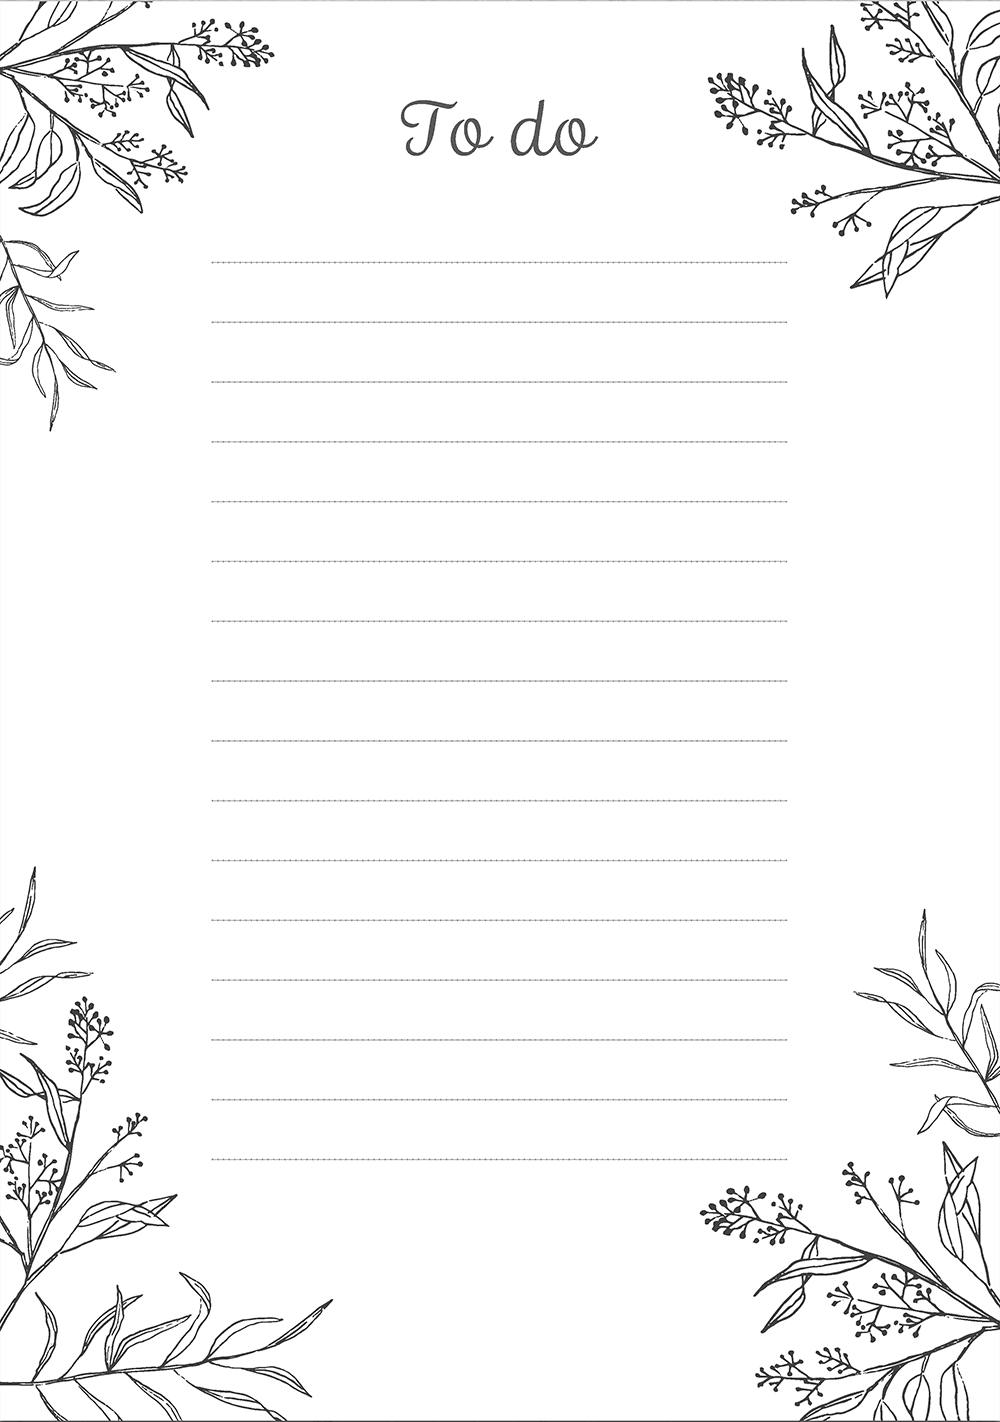 Pretty And Simple Black White To do List Free Printable Downloads 